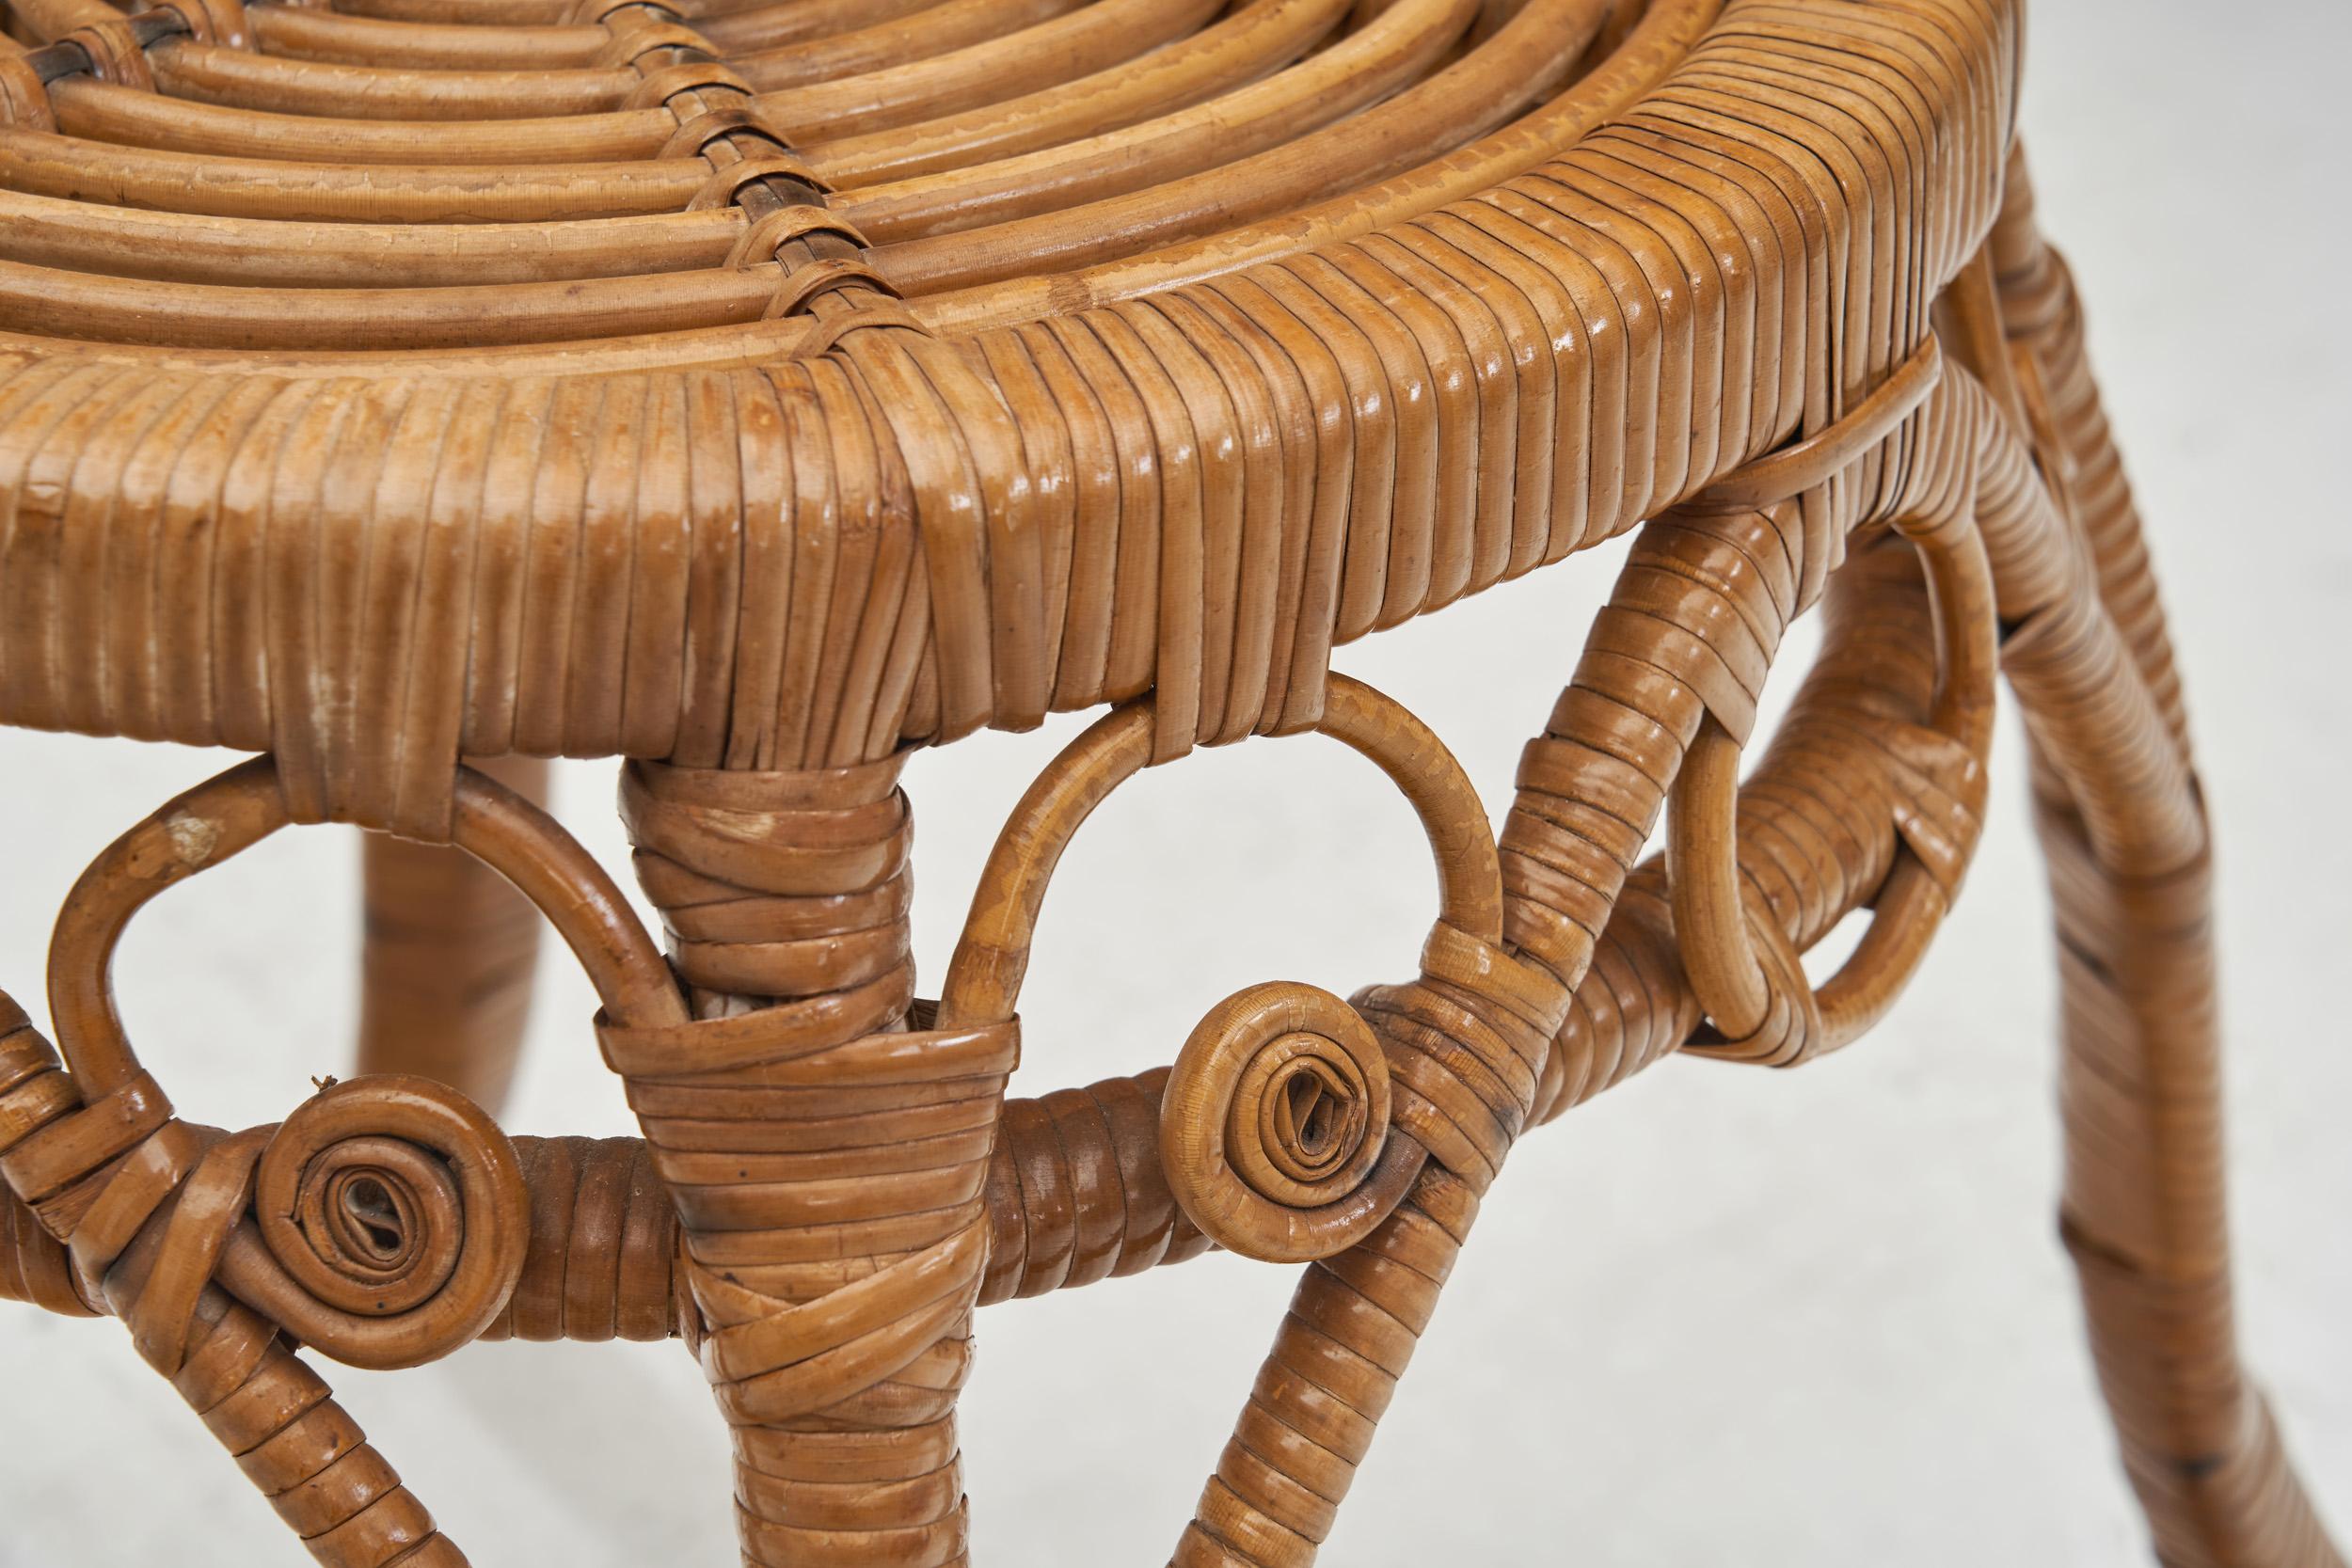 Woven Rattan Stool, Europe Early 20th Century For Sale 8